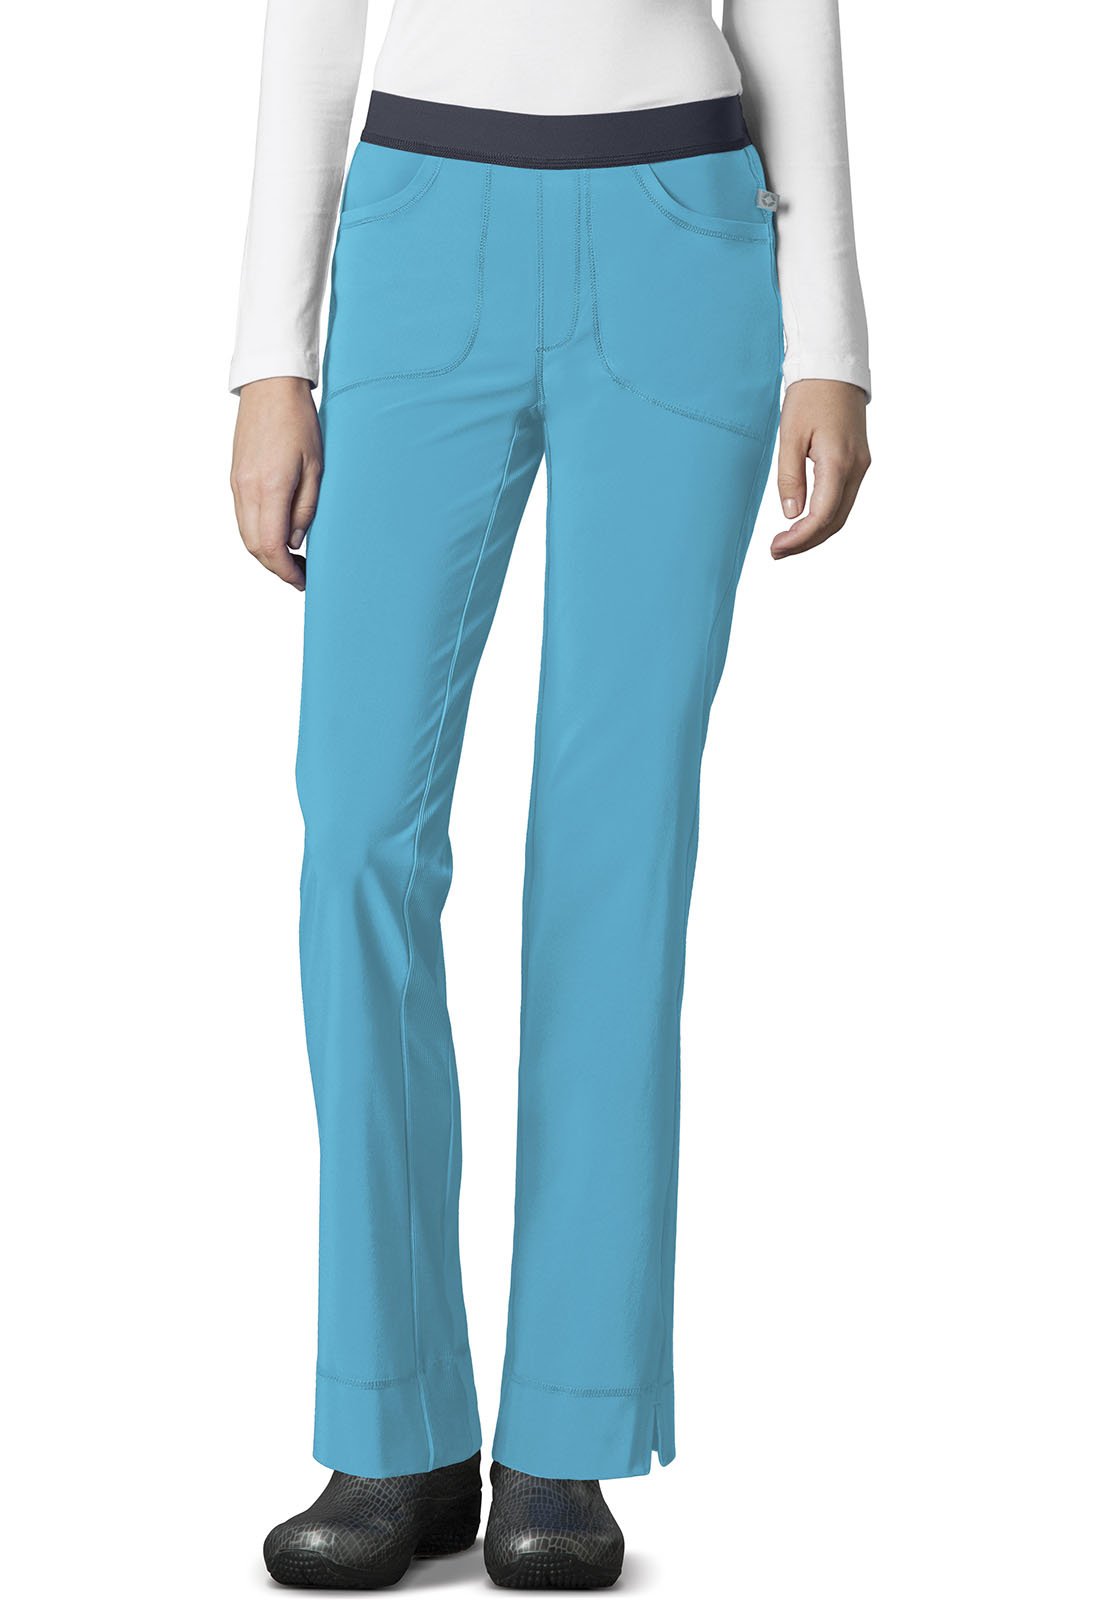 CHEROKEE Turquoise Low Rise Pull-On Women's Pants 1124A